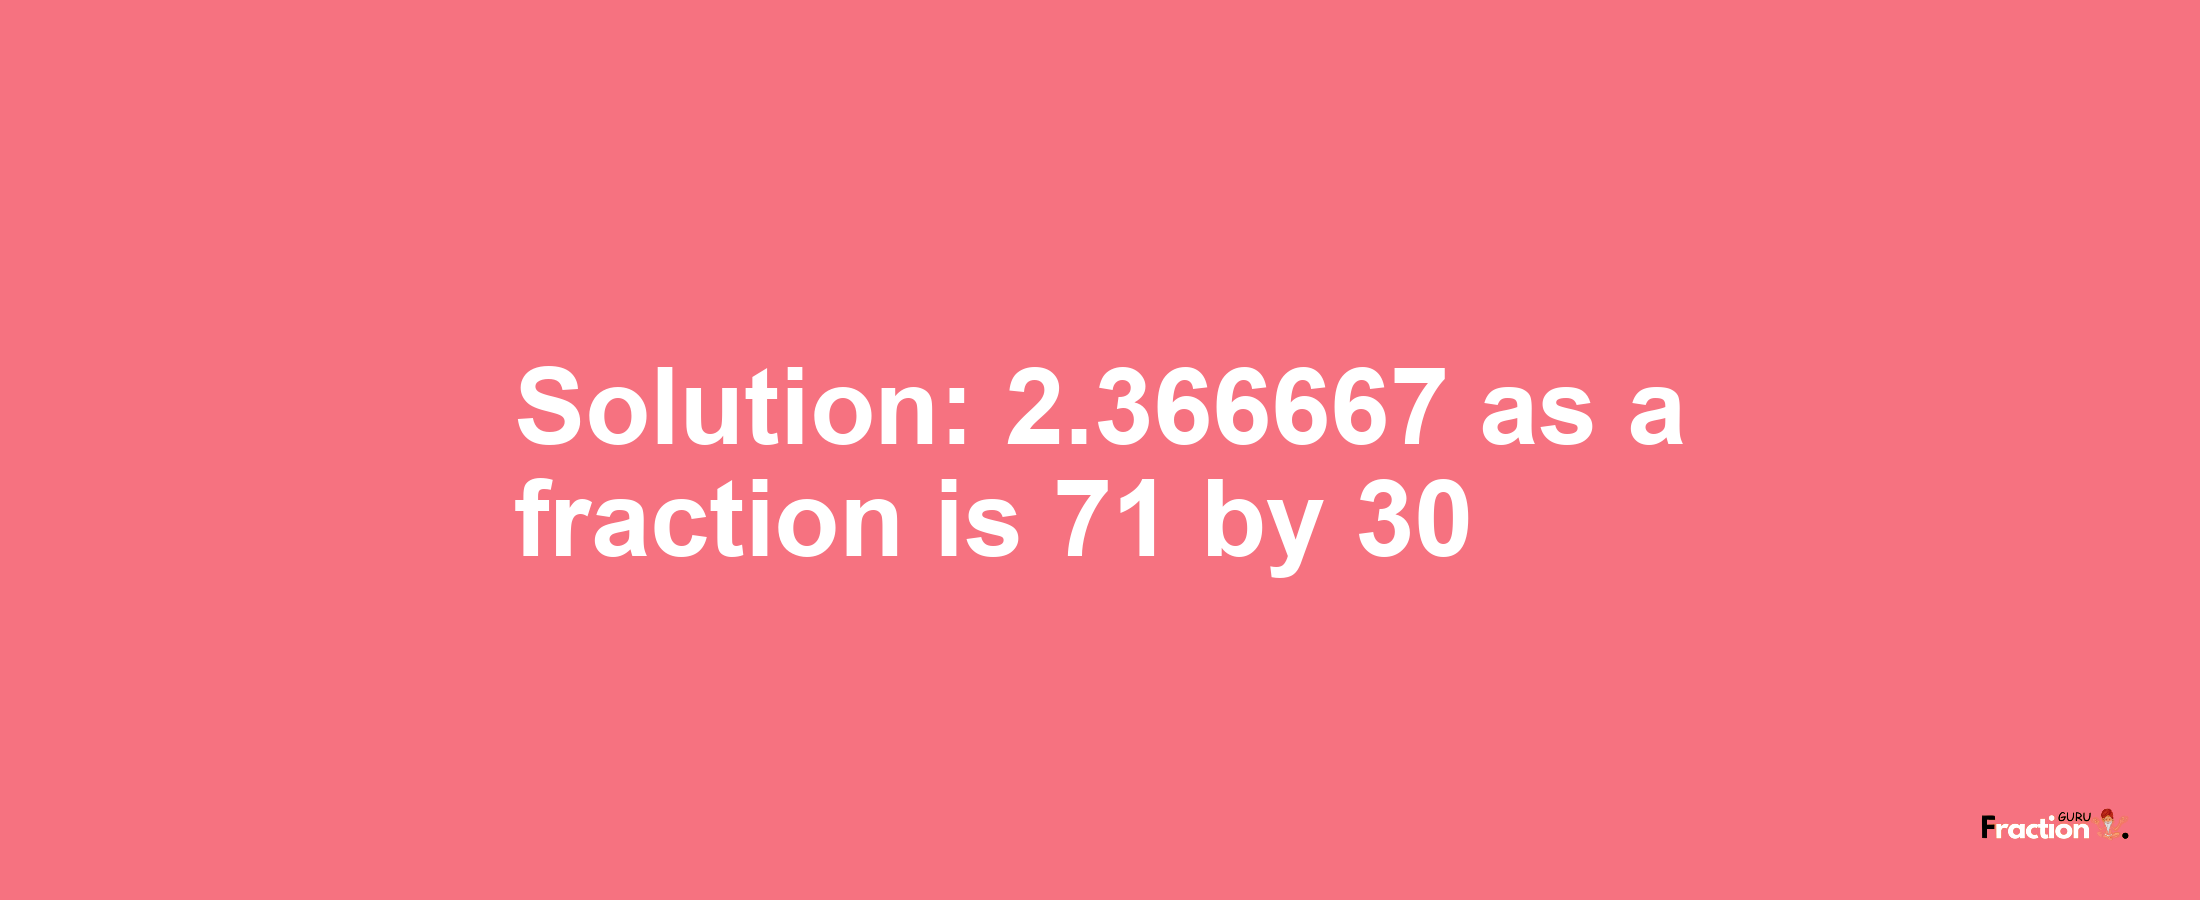 Solution:2.366667 as a fraction is 71/30